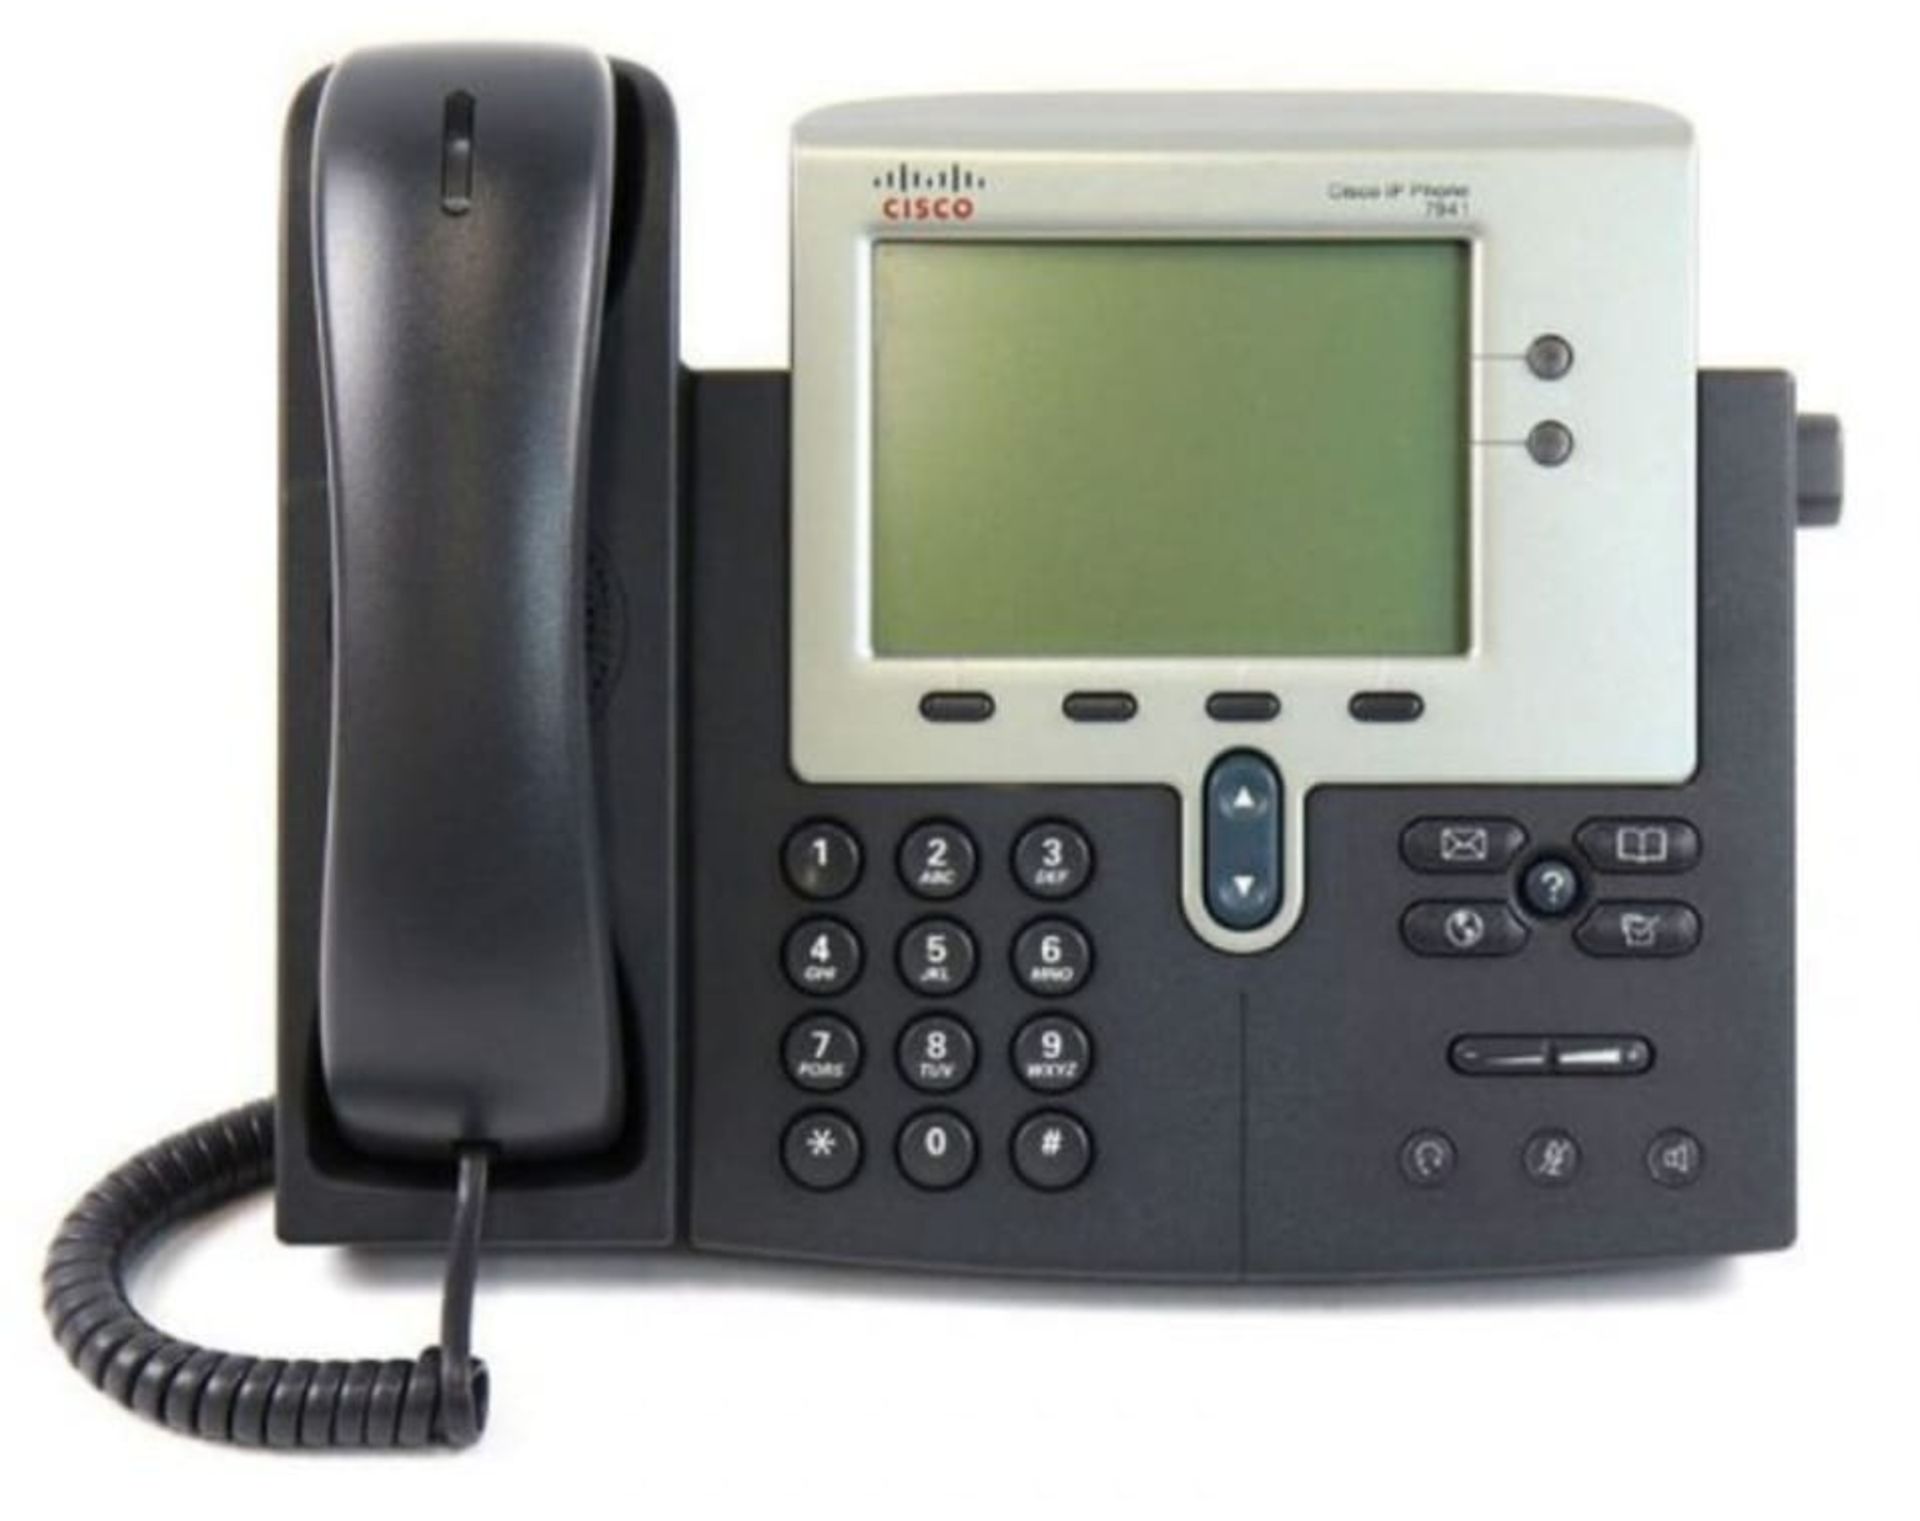 X 8 CISCO IP PHONES 7941, FROM A WORKING ENVIRONMENT BUT NOT TESTED BY US - SALEROOM ON MID OF